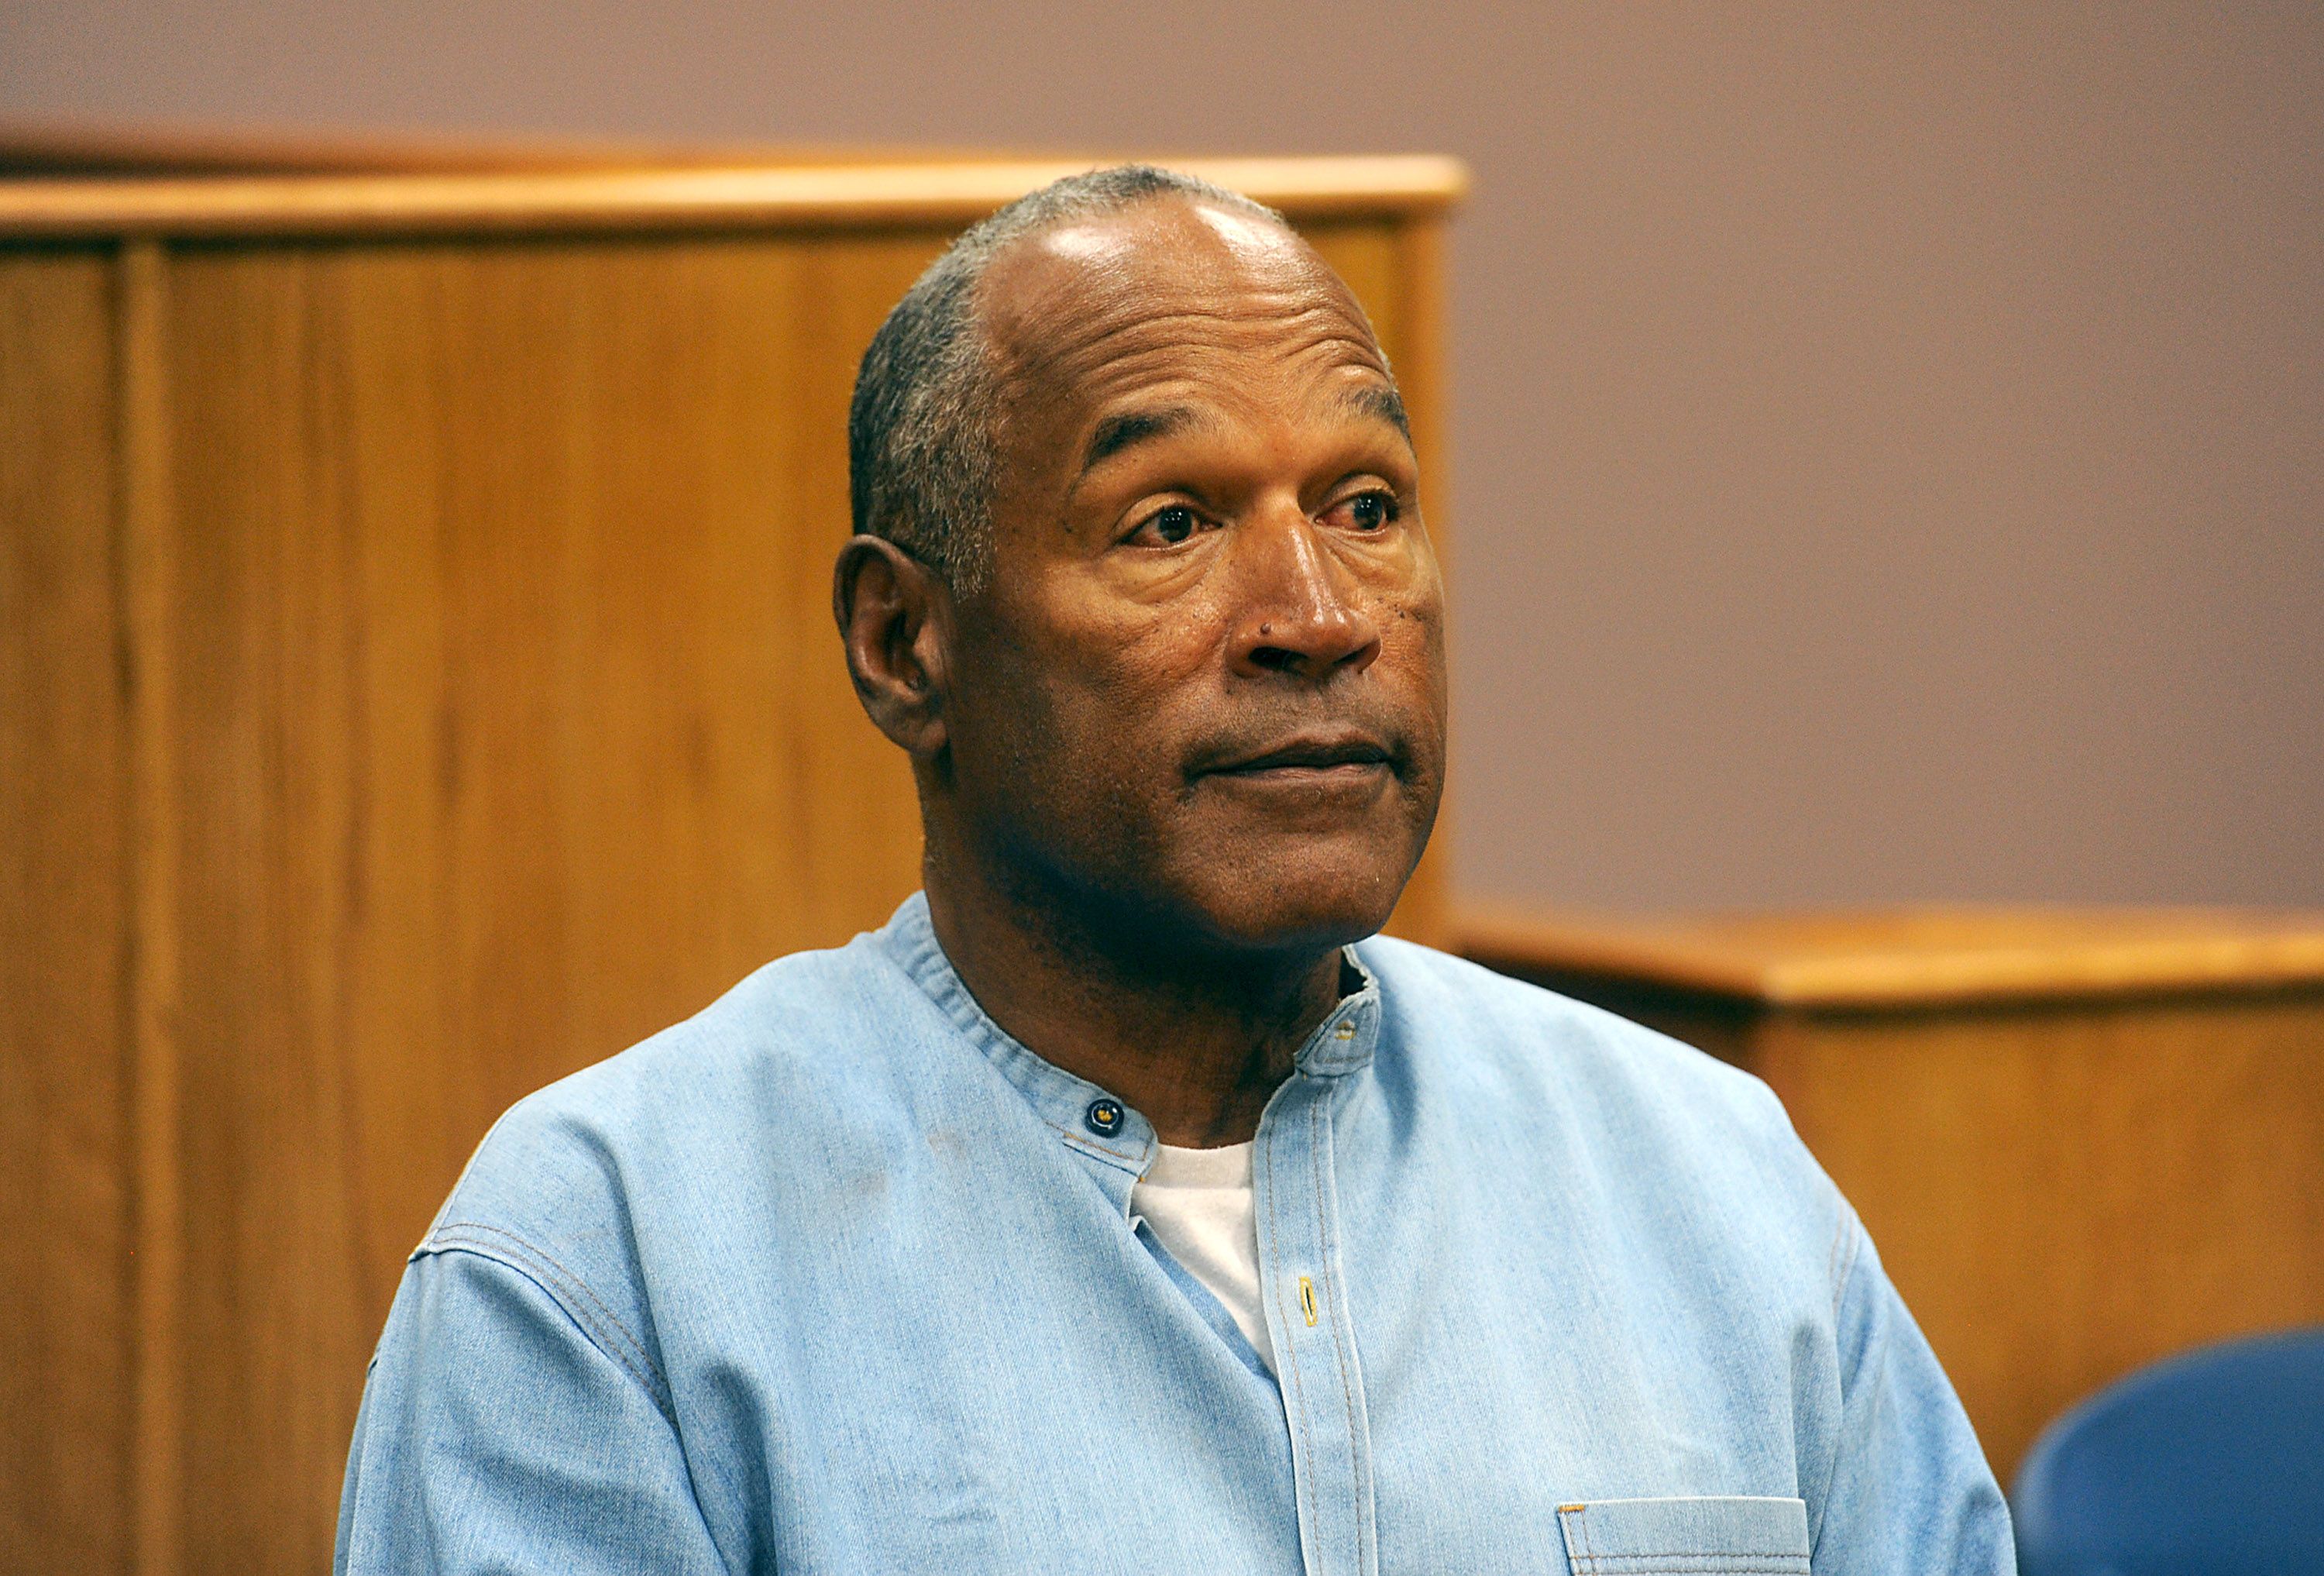 O.J. Simpson during his parole hearing at Lovelock Correctional Center July 20, 2017 in Lovelock, Nevada. | Source: Getty Images